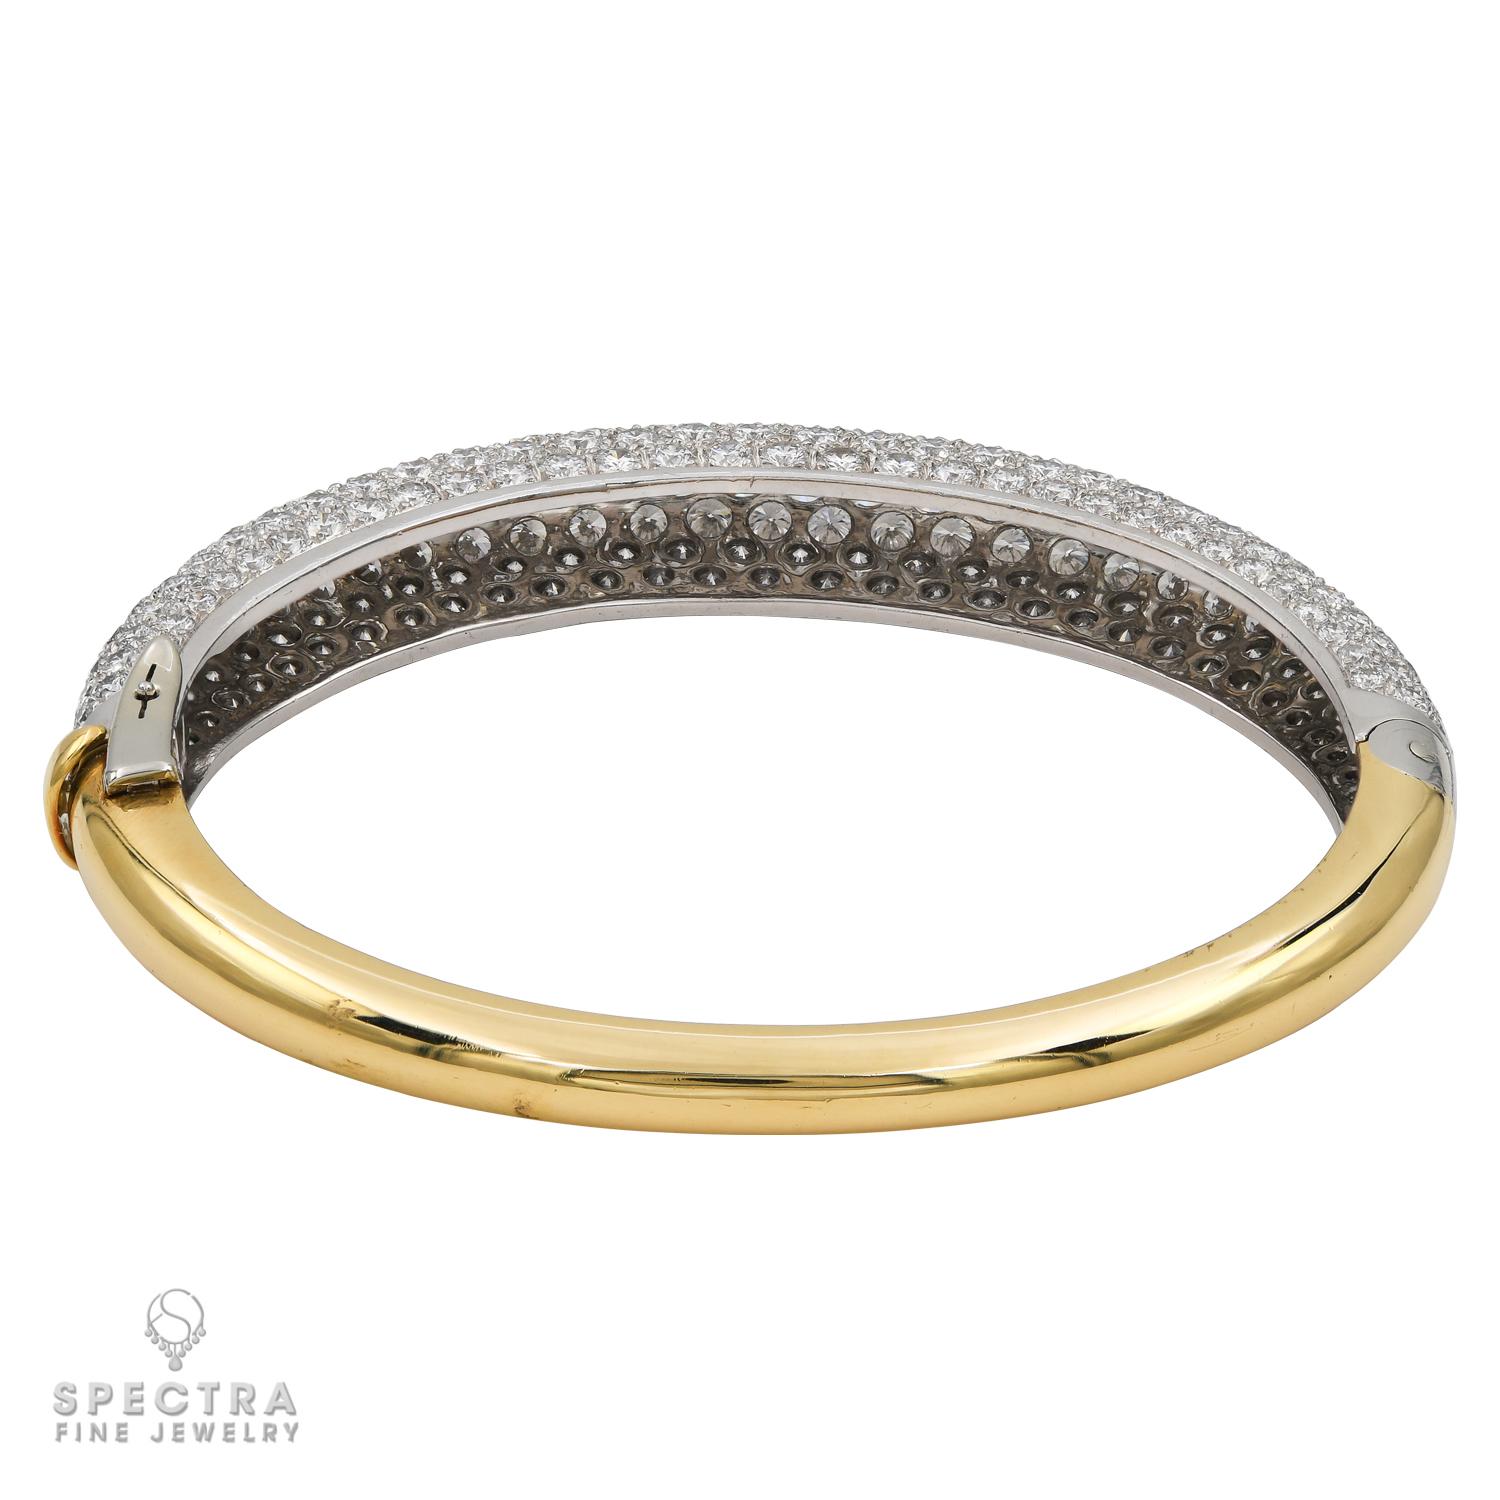 Contemporary Van Cleef & Arpels Diamond and 18kt Yellow Gold Bracelet, circa 1970 For Sale